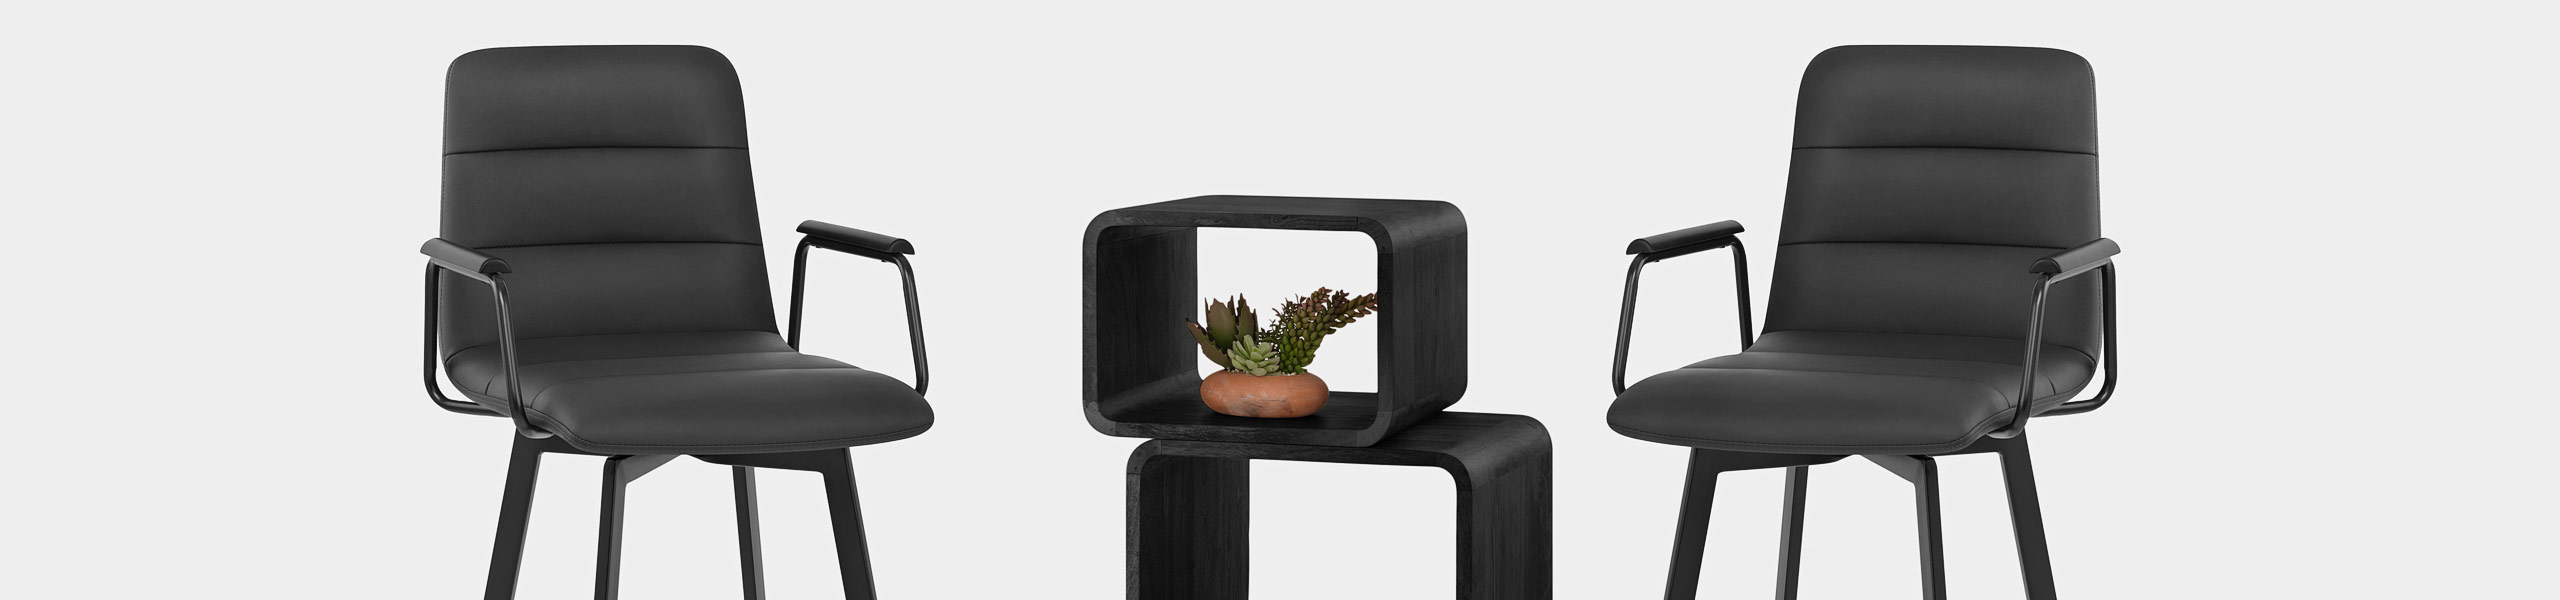 Marco Stool Black Arms & Black Leather Video Banner